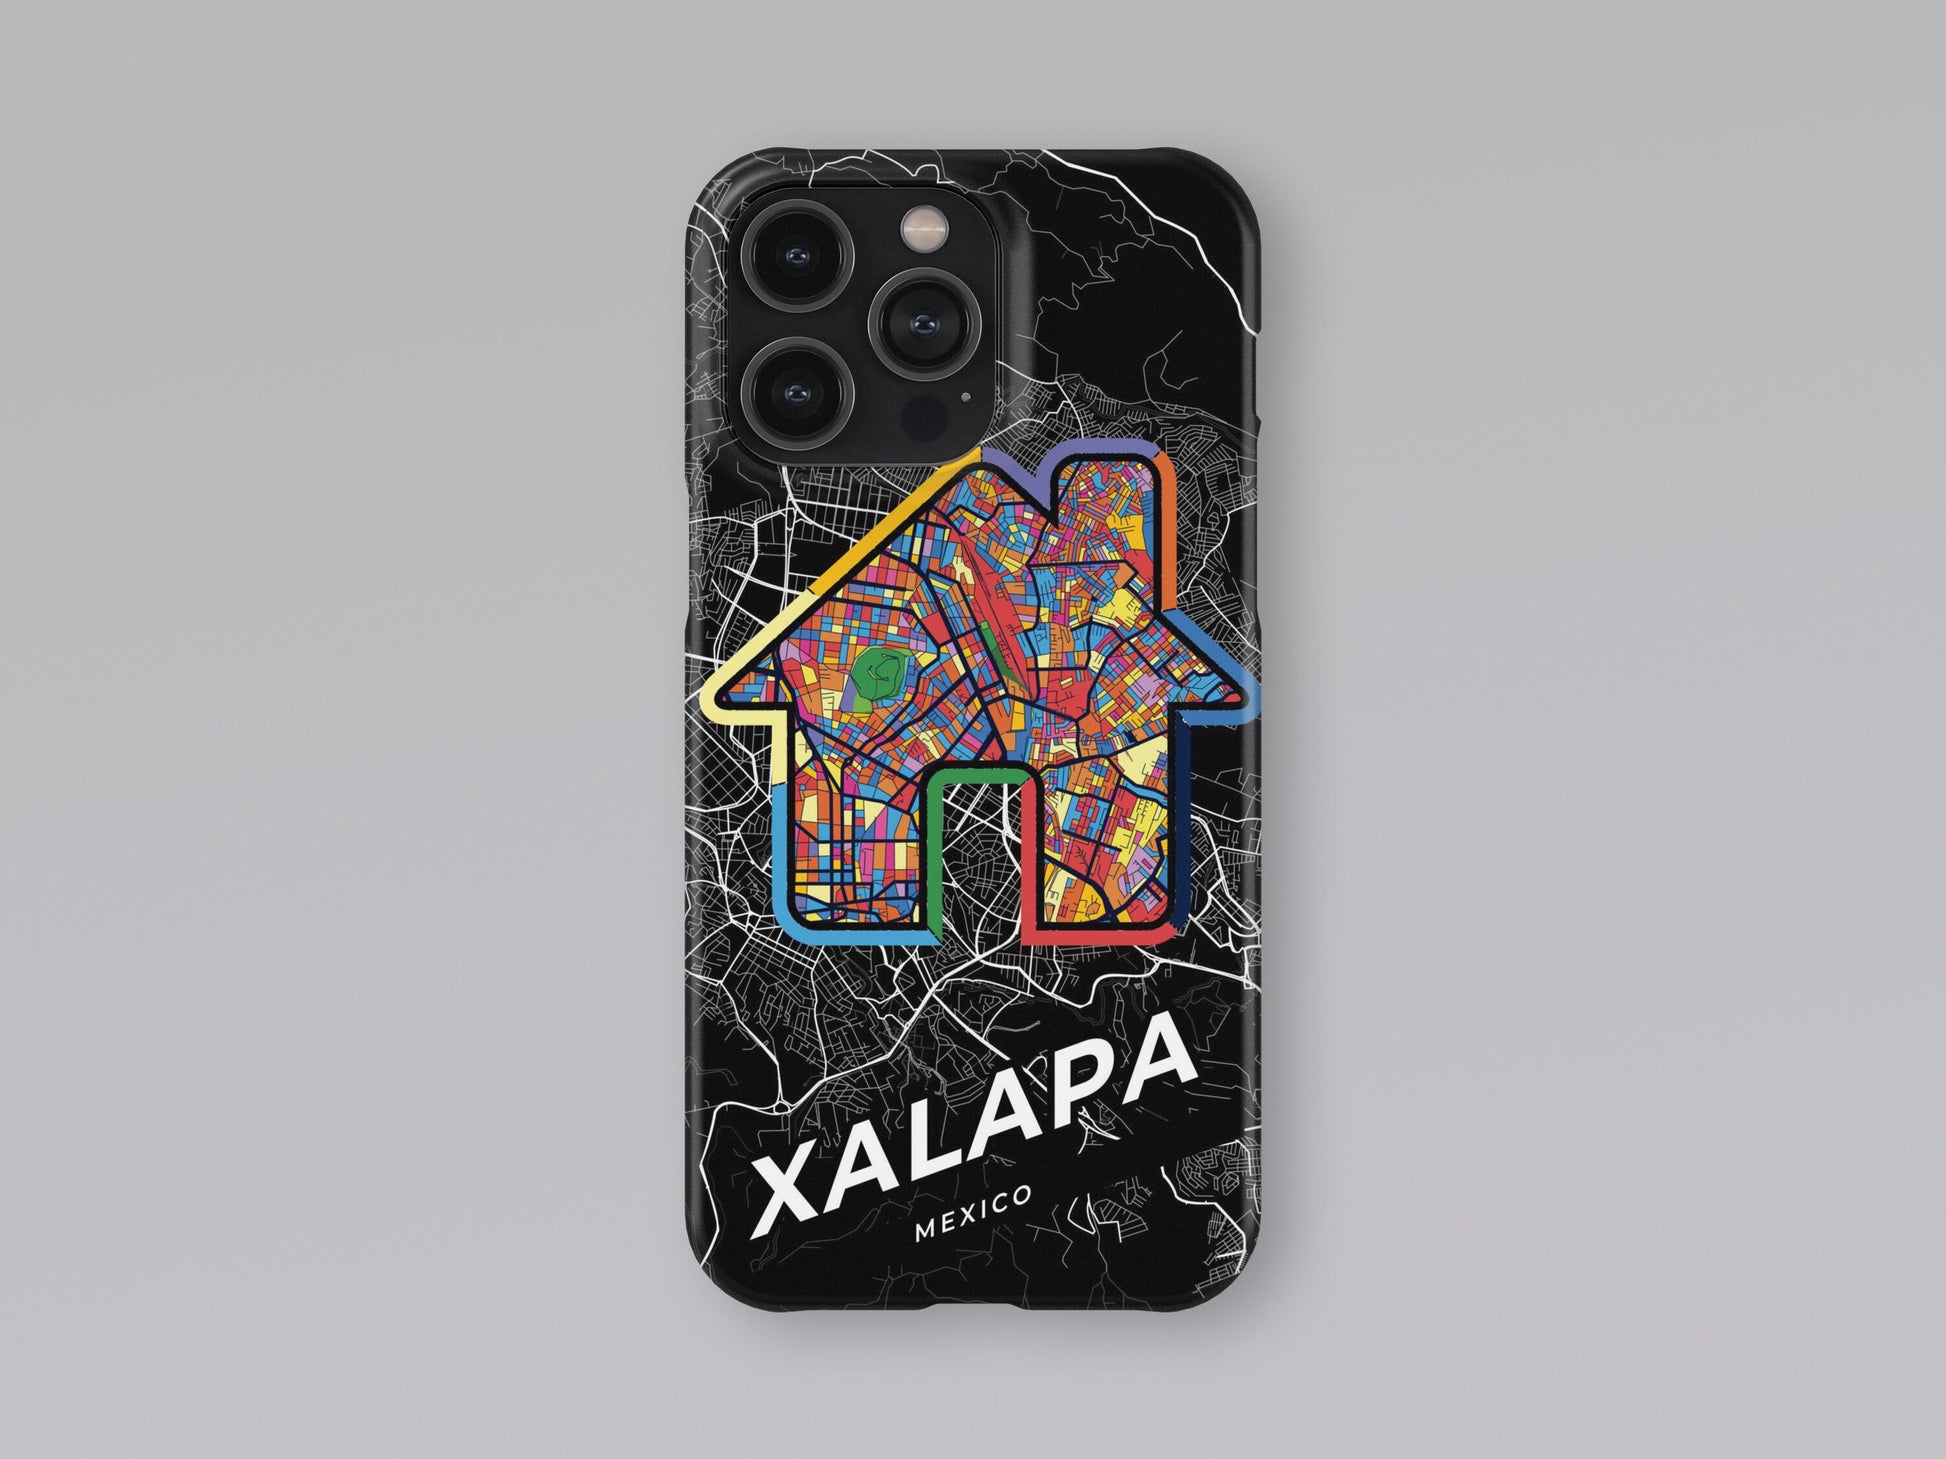 Xalapa Mexico slim phone case with colorful icon 3